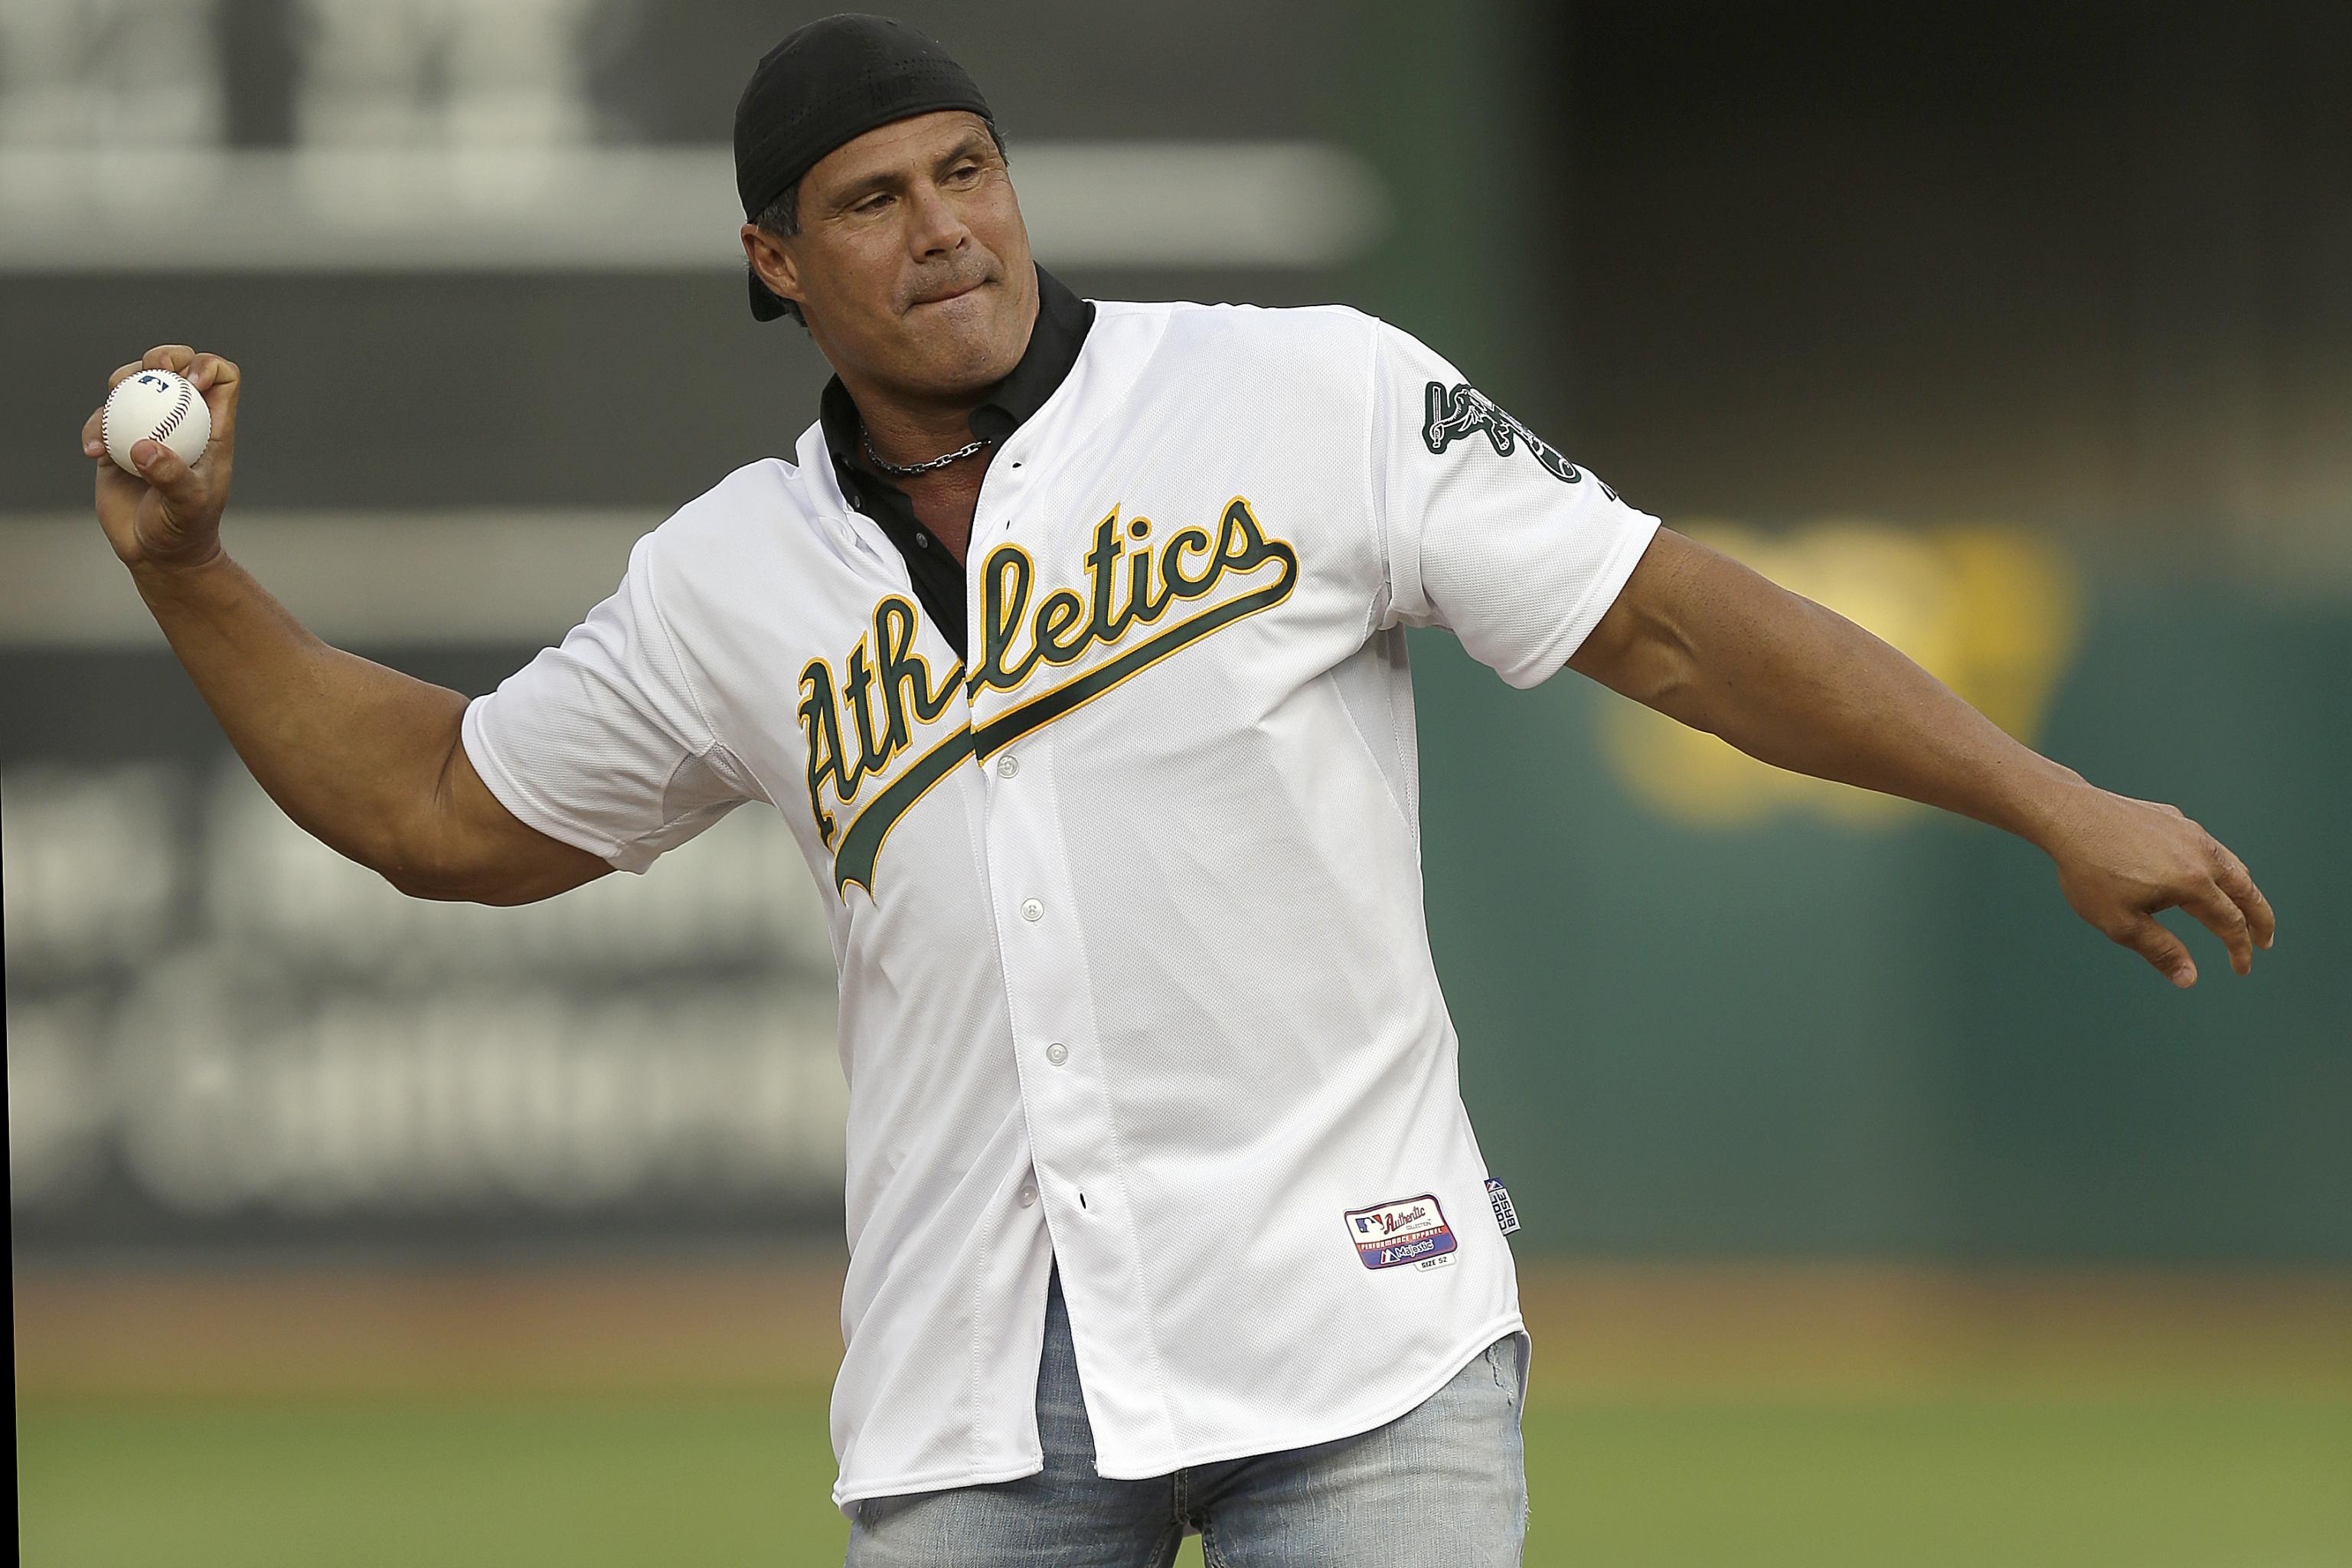 Jose Canseco Hired as Athletics On-Air TV Analyst for NBC Sports